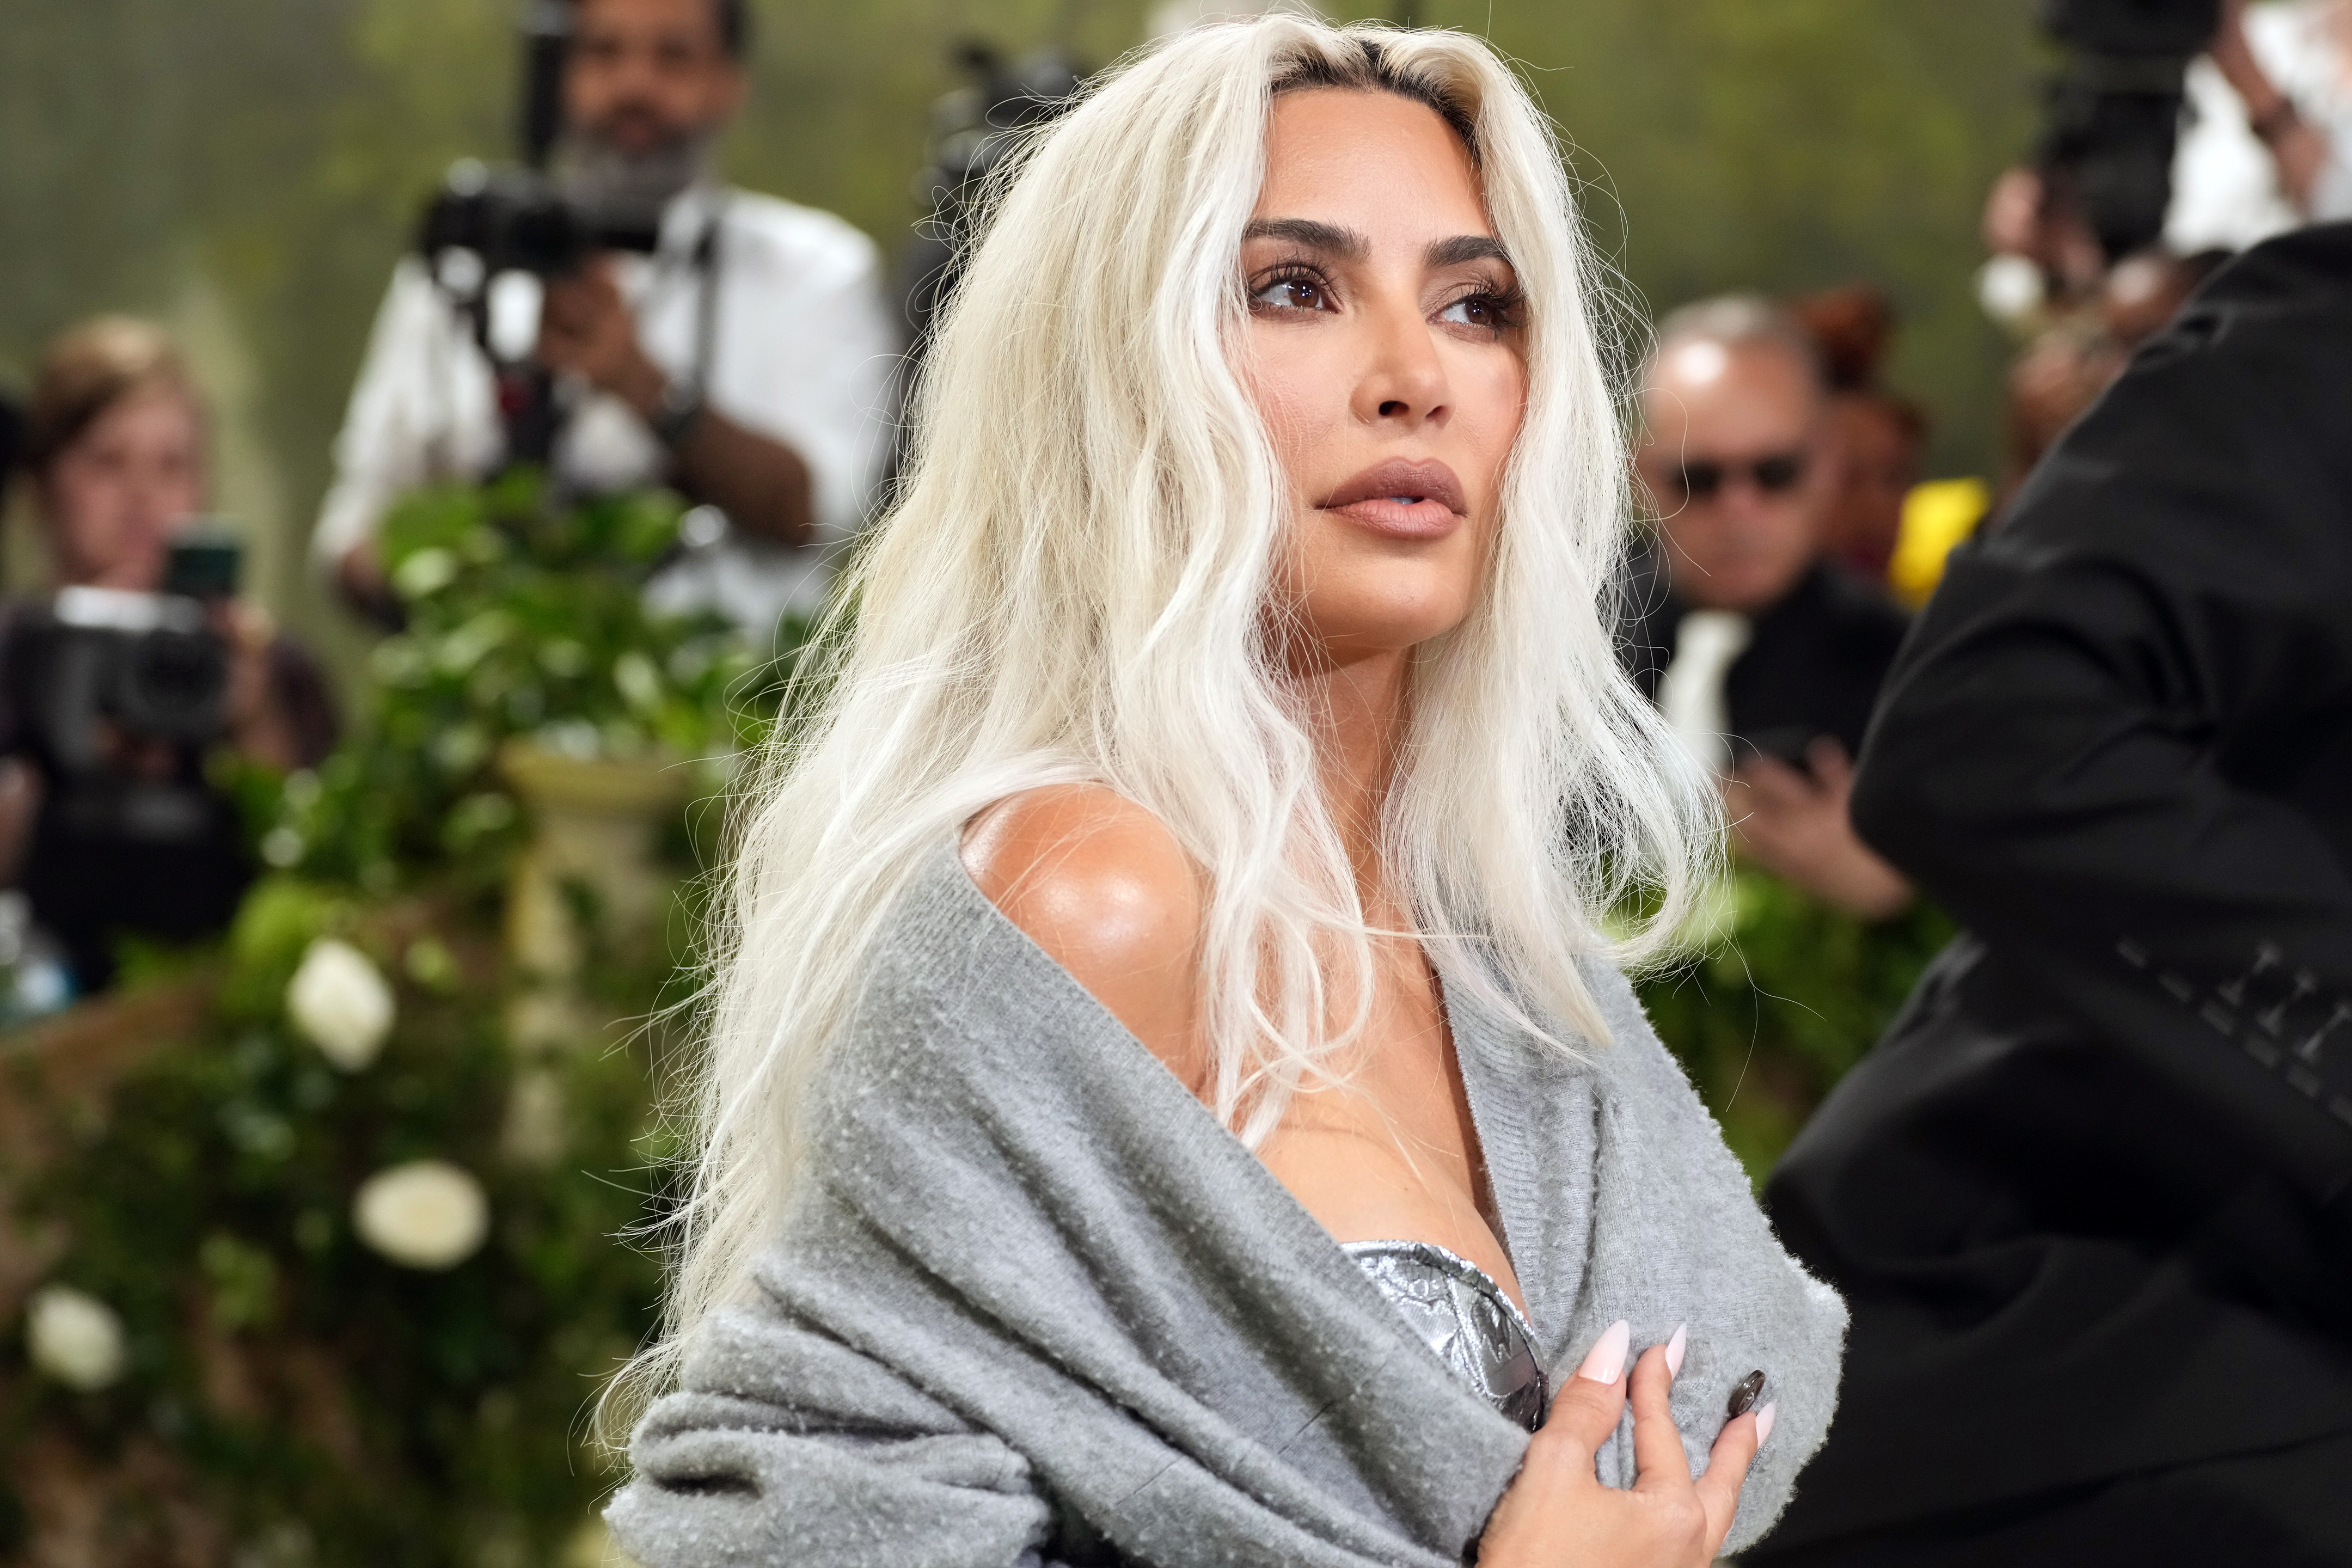 Kim Kardashian seemingly didn't receive a Mother's Day gift from her ex-husband